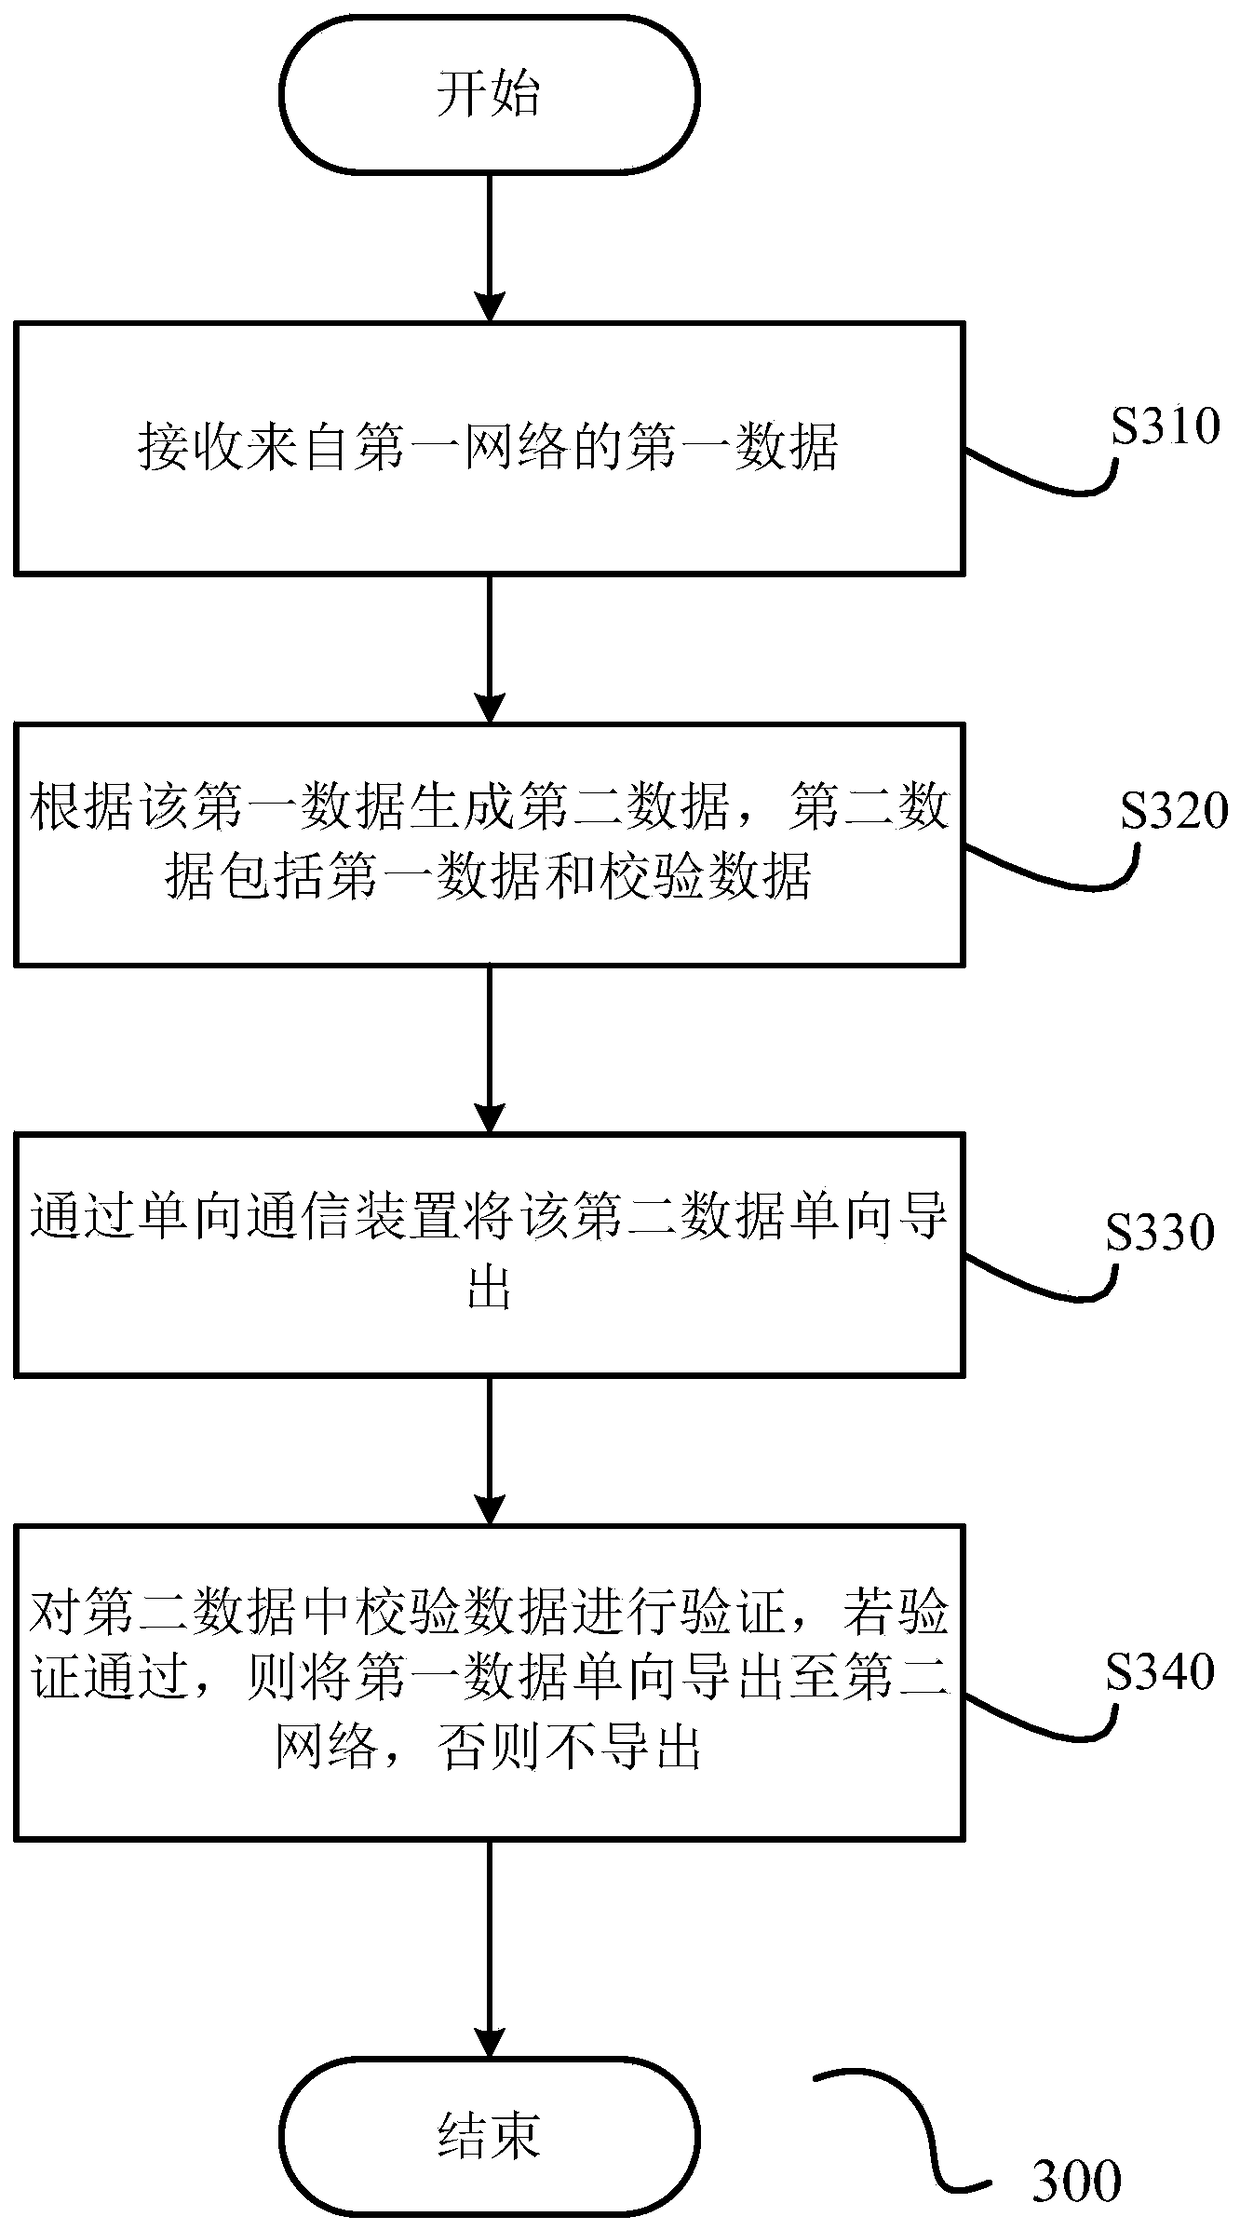 A data security one-way export system and method